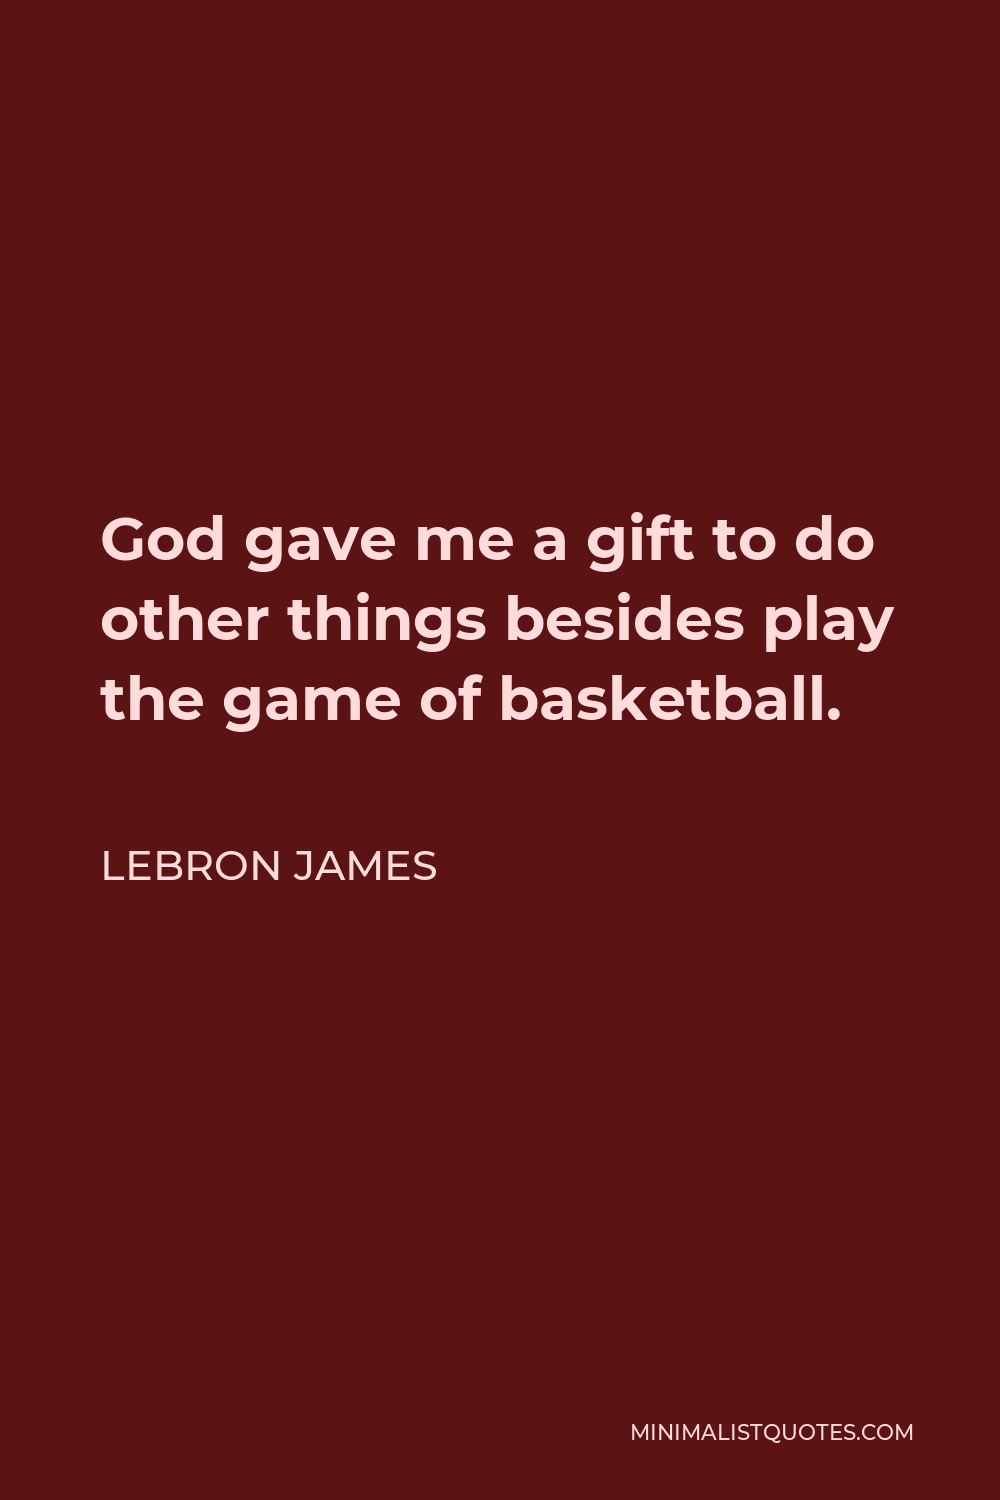 LeBron James Quote - God gave me a gift to do other things besides play the game of basketball.